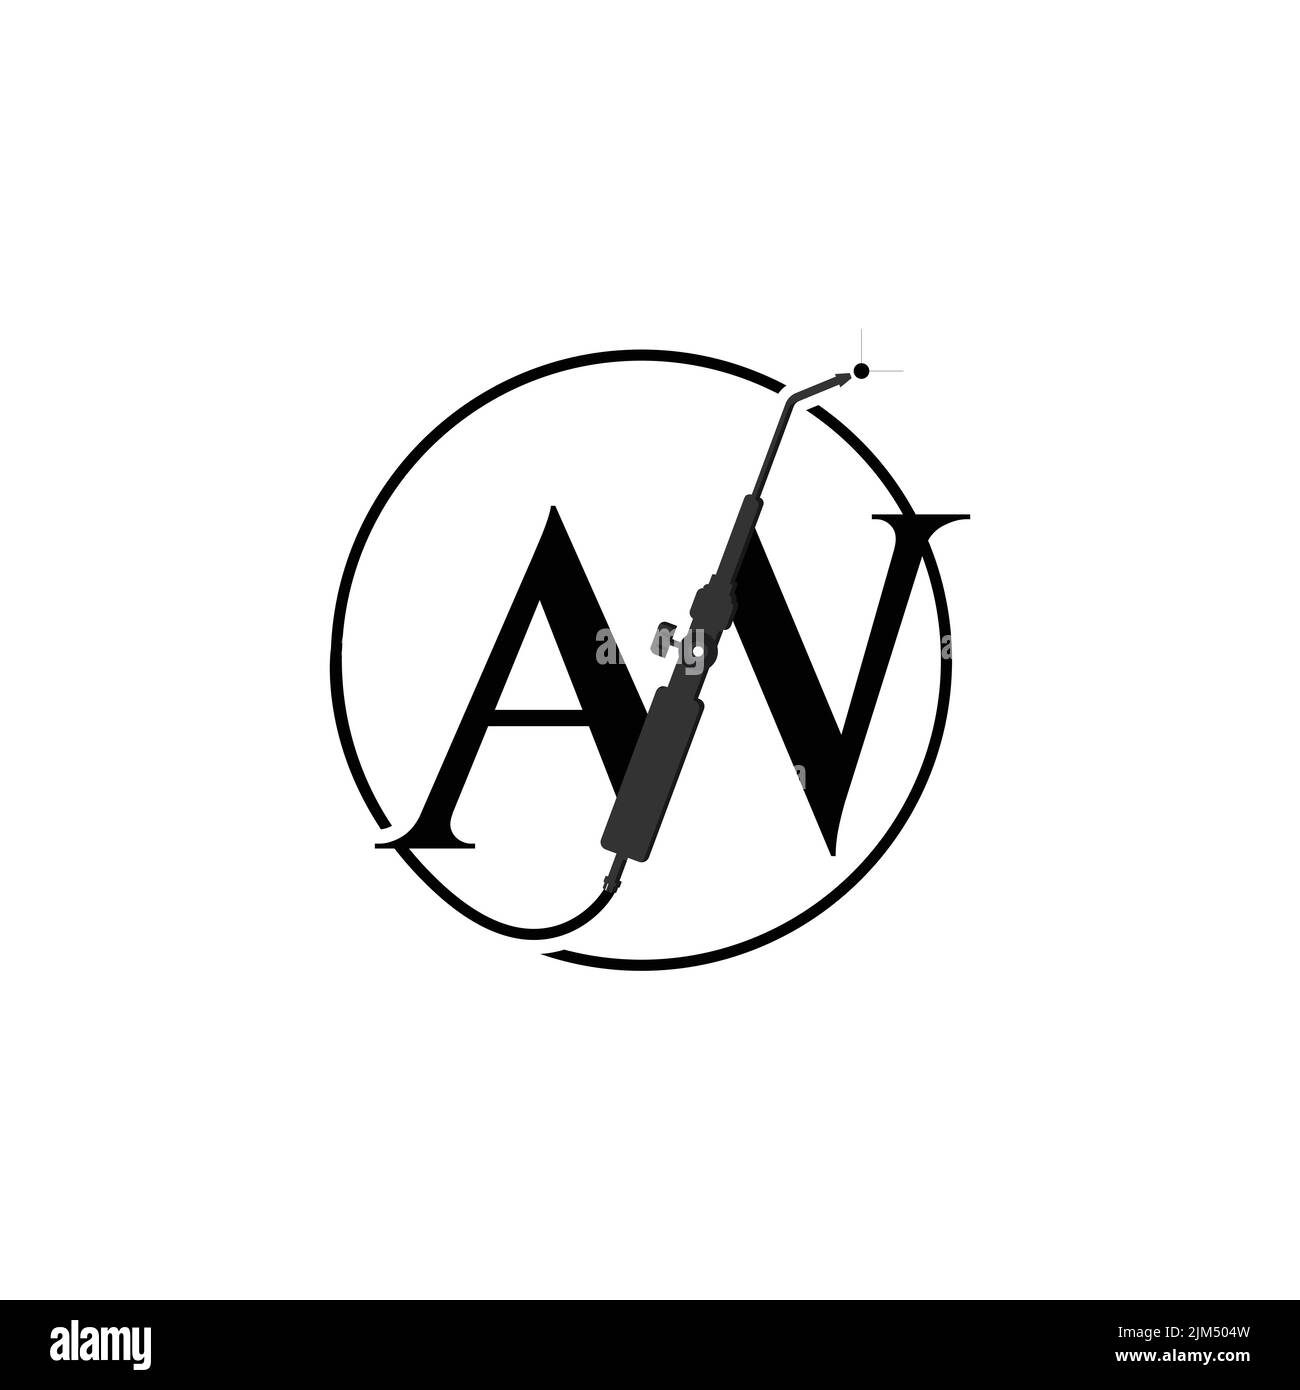 Initial AW letter welding logo design. Acronym typography logo with letter A and W, welding tool inside of circle shape Stock Vector